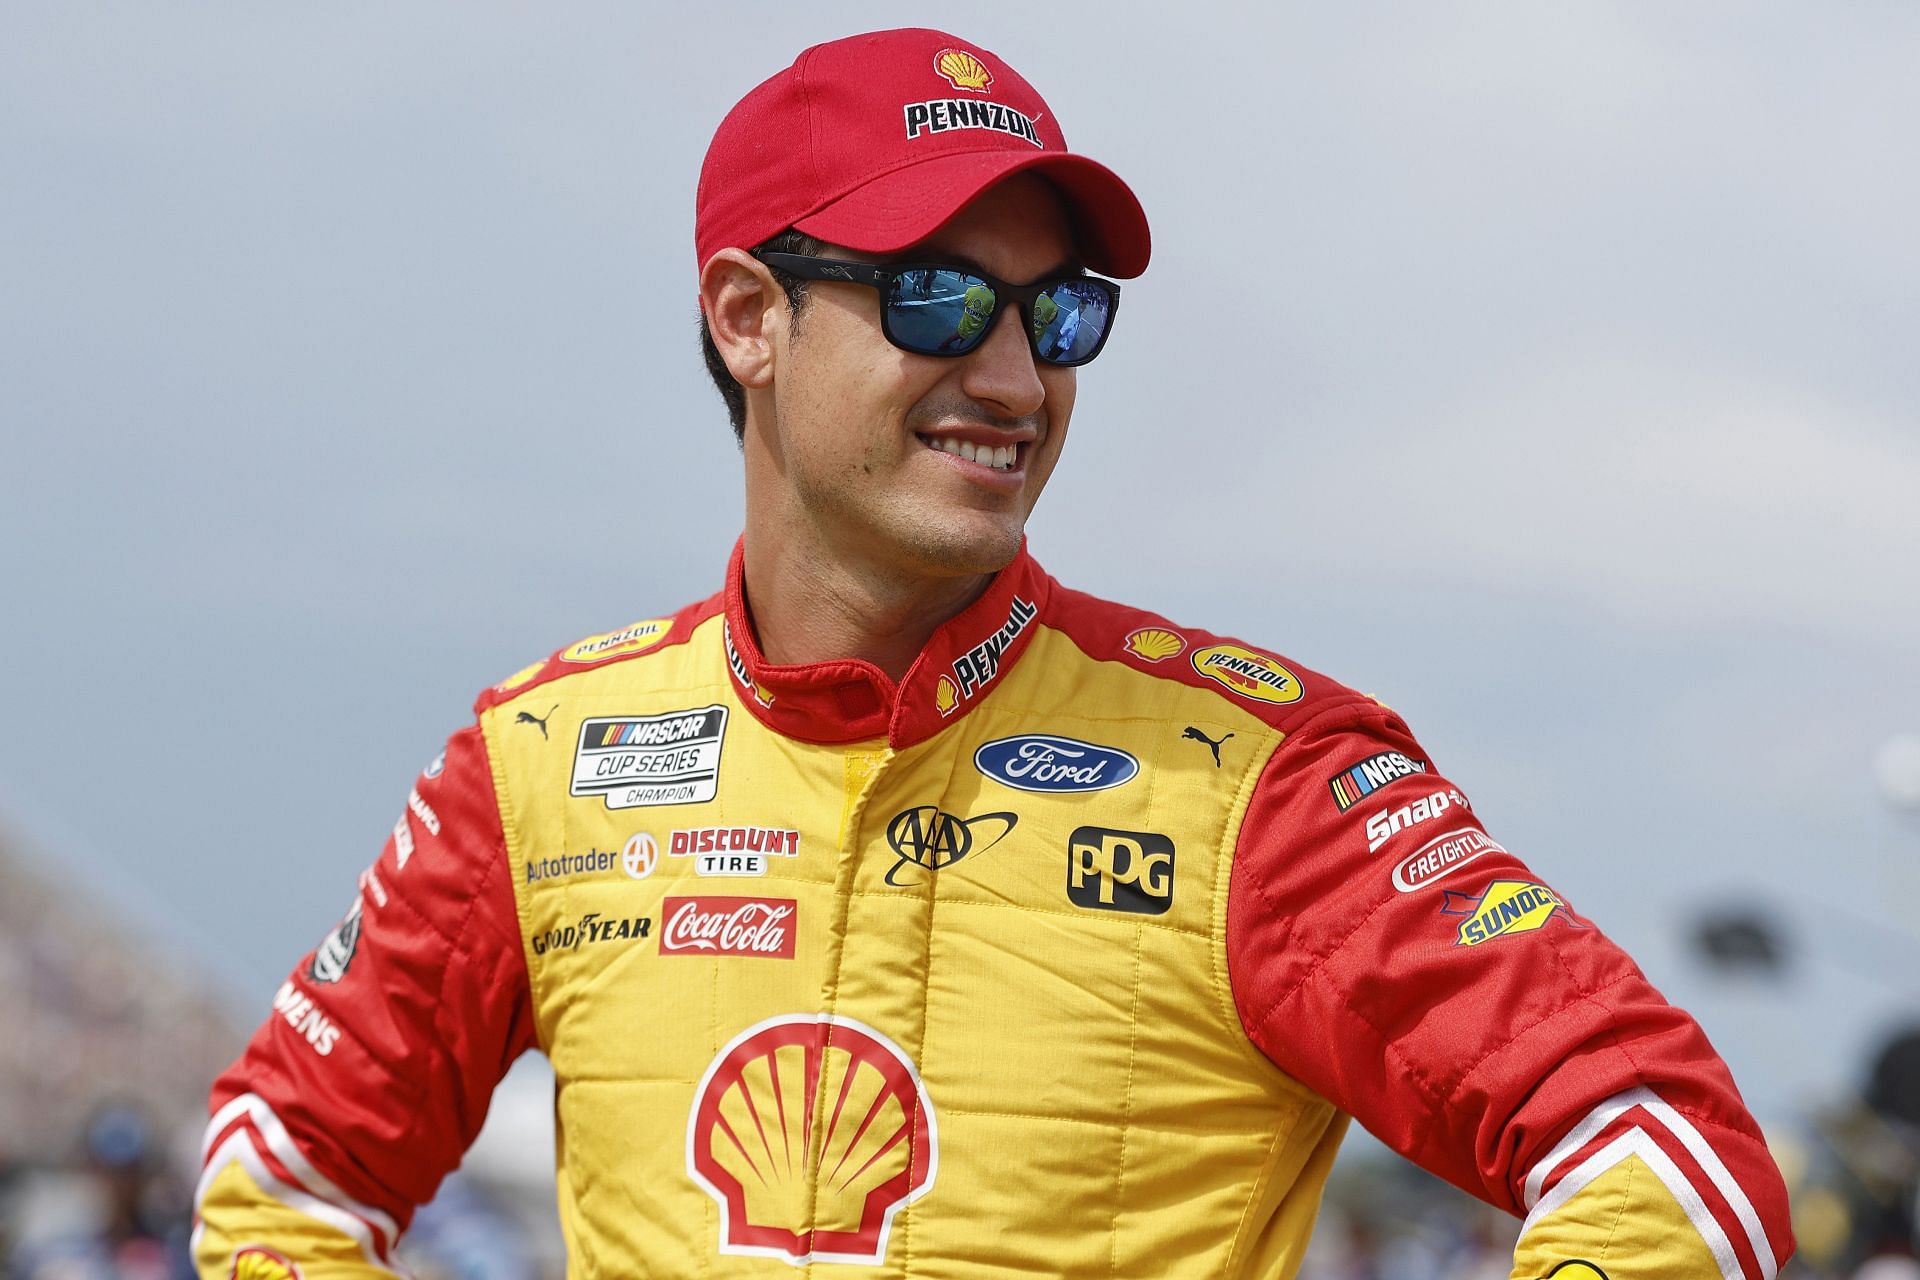 Joey Logano waits on the grid prior to the NASCAR Cup Series FireKeepers Casino 400 at Michigan International Speedway